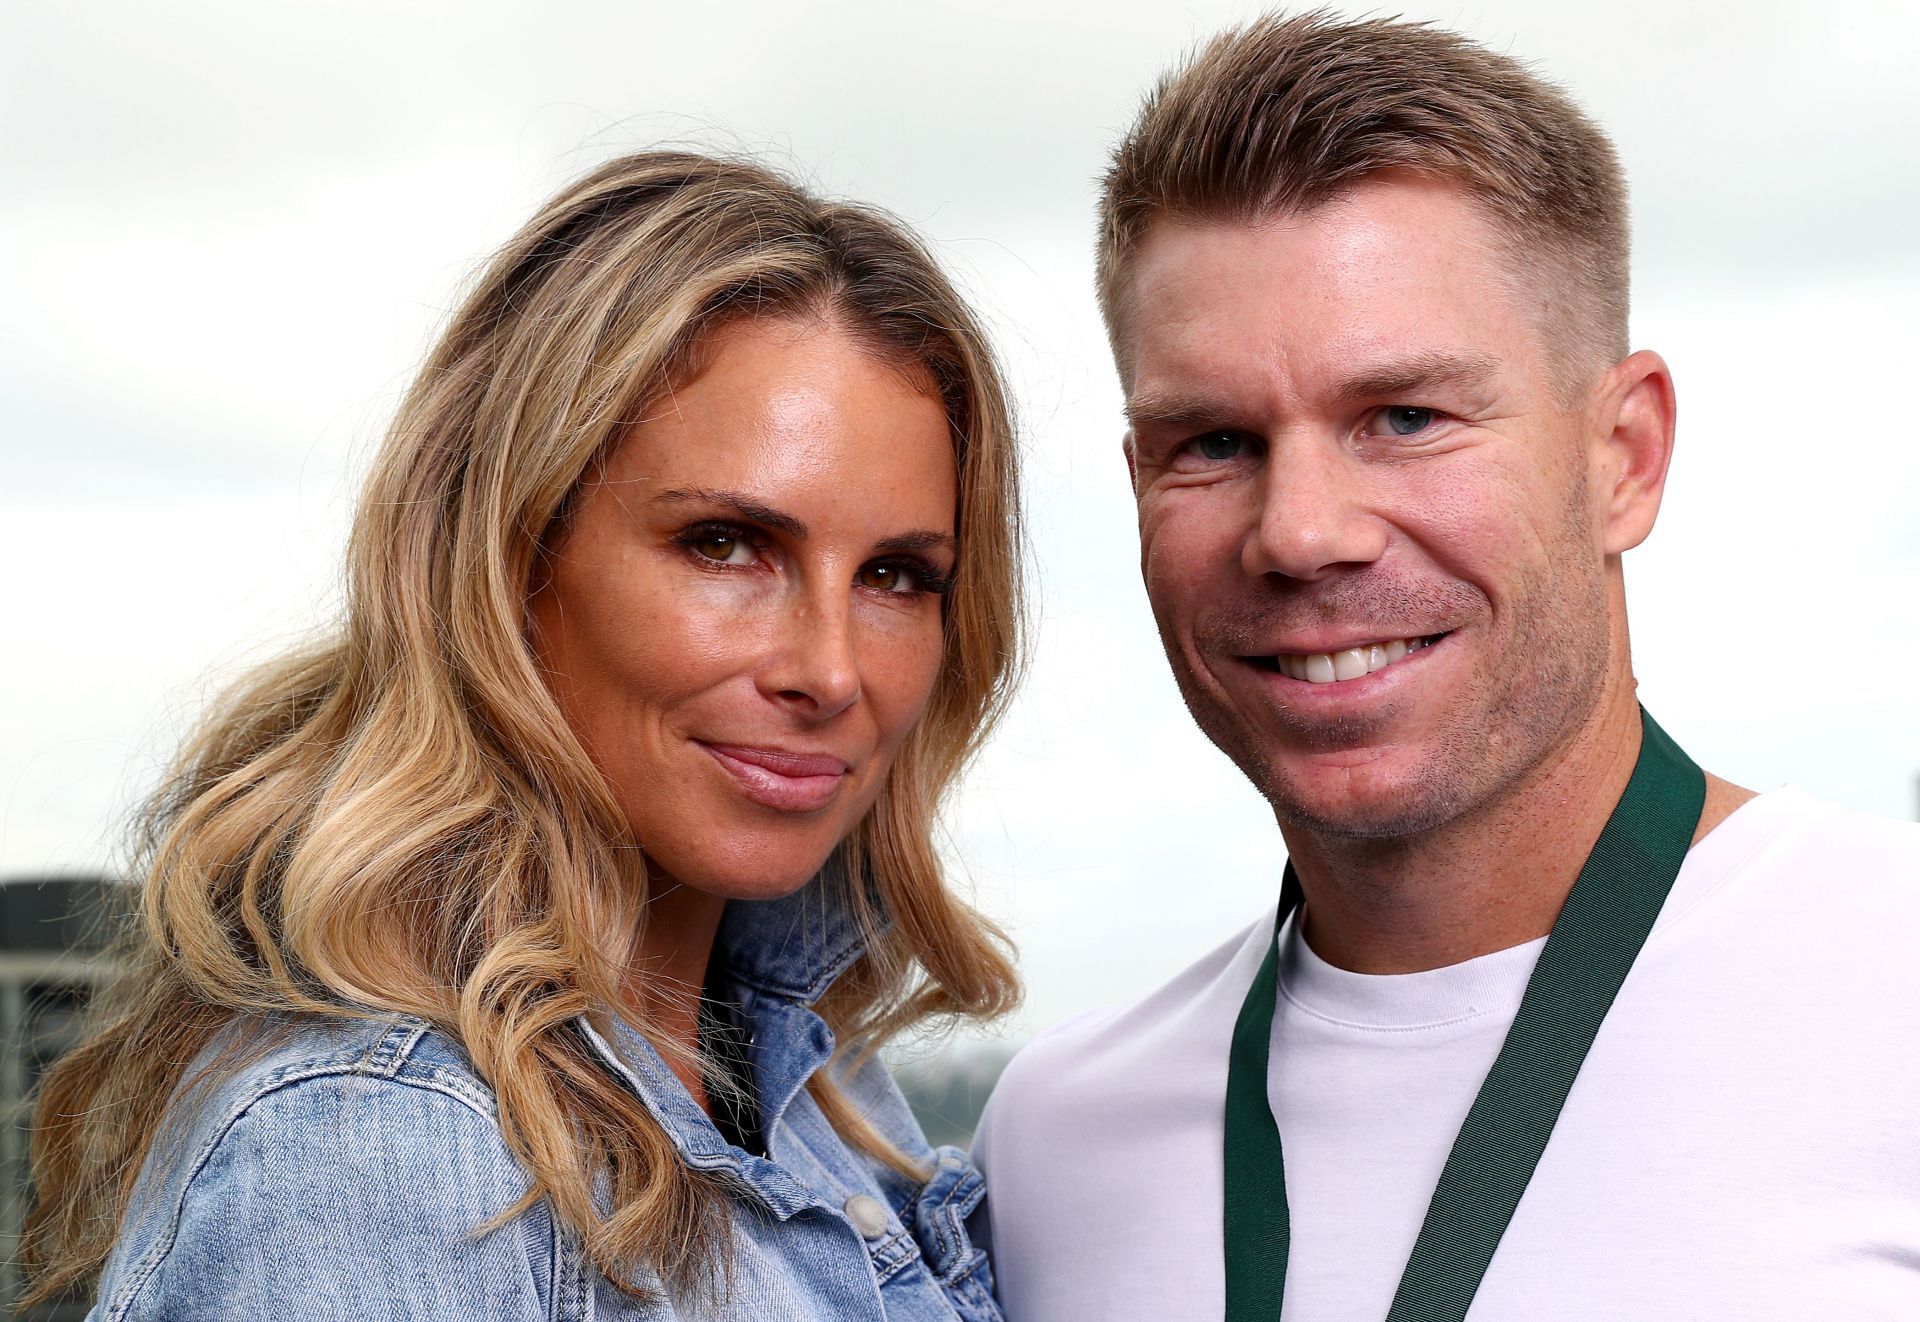 Candice Warner has been vocal about the injustice meted out to his husband.